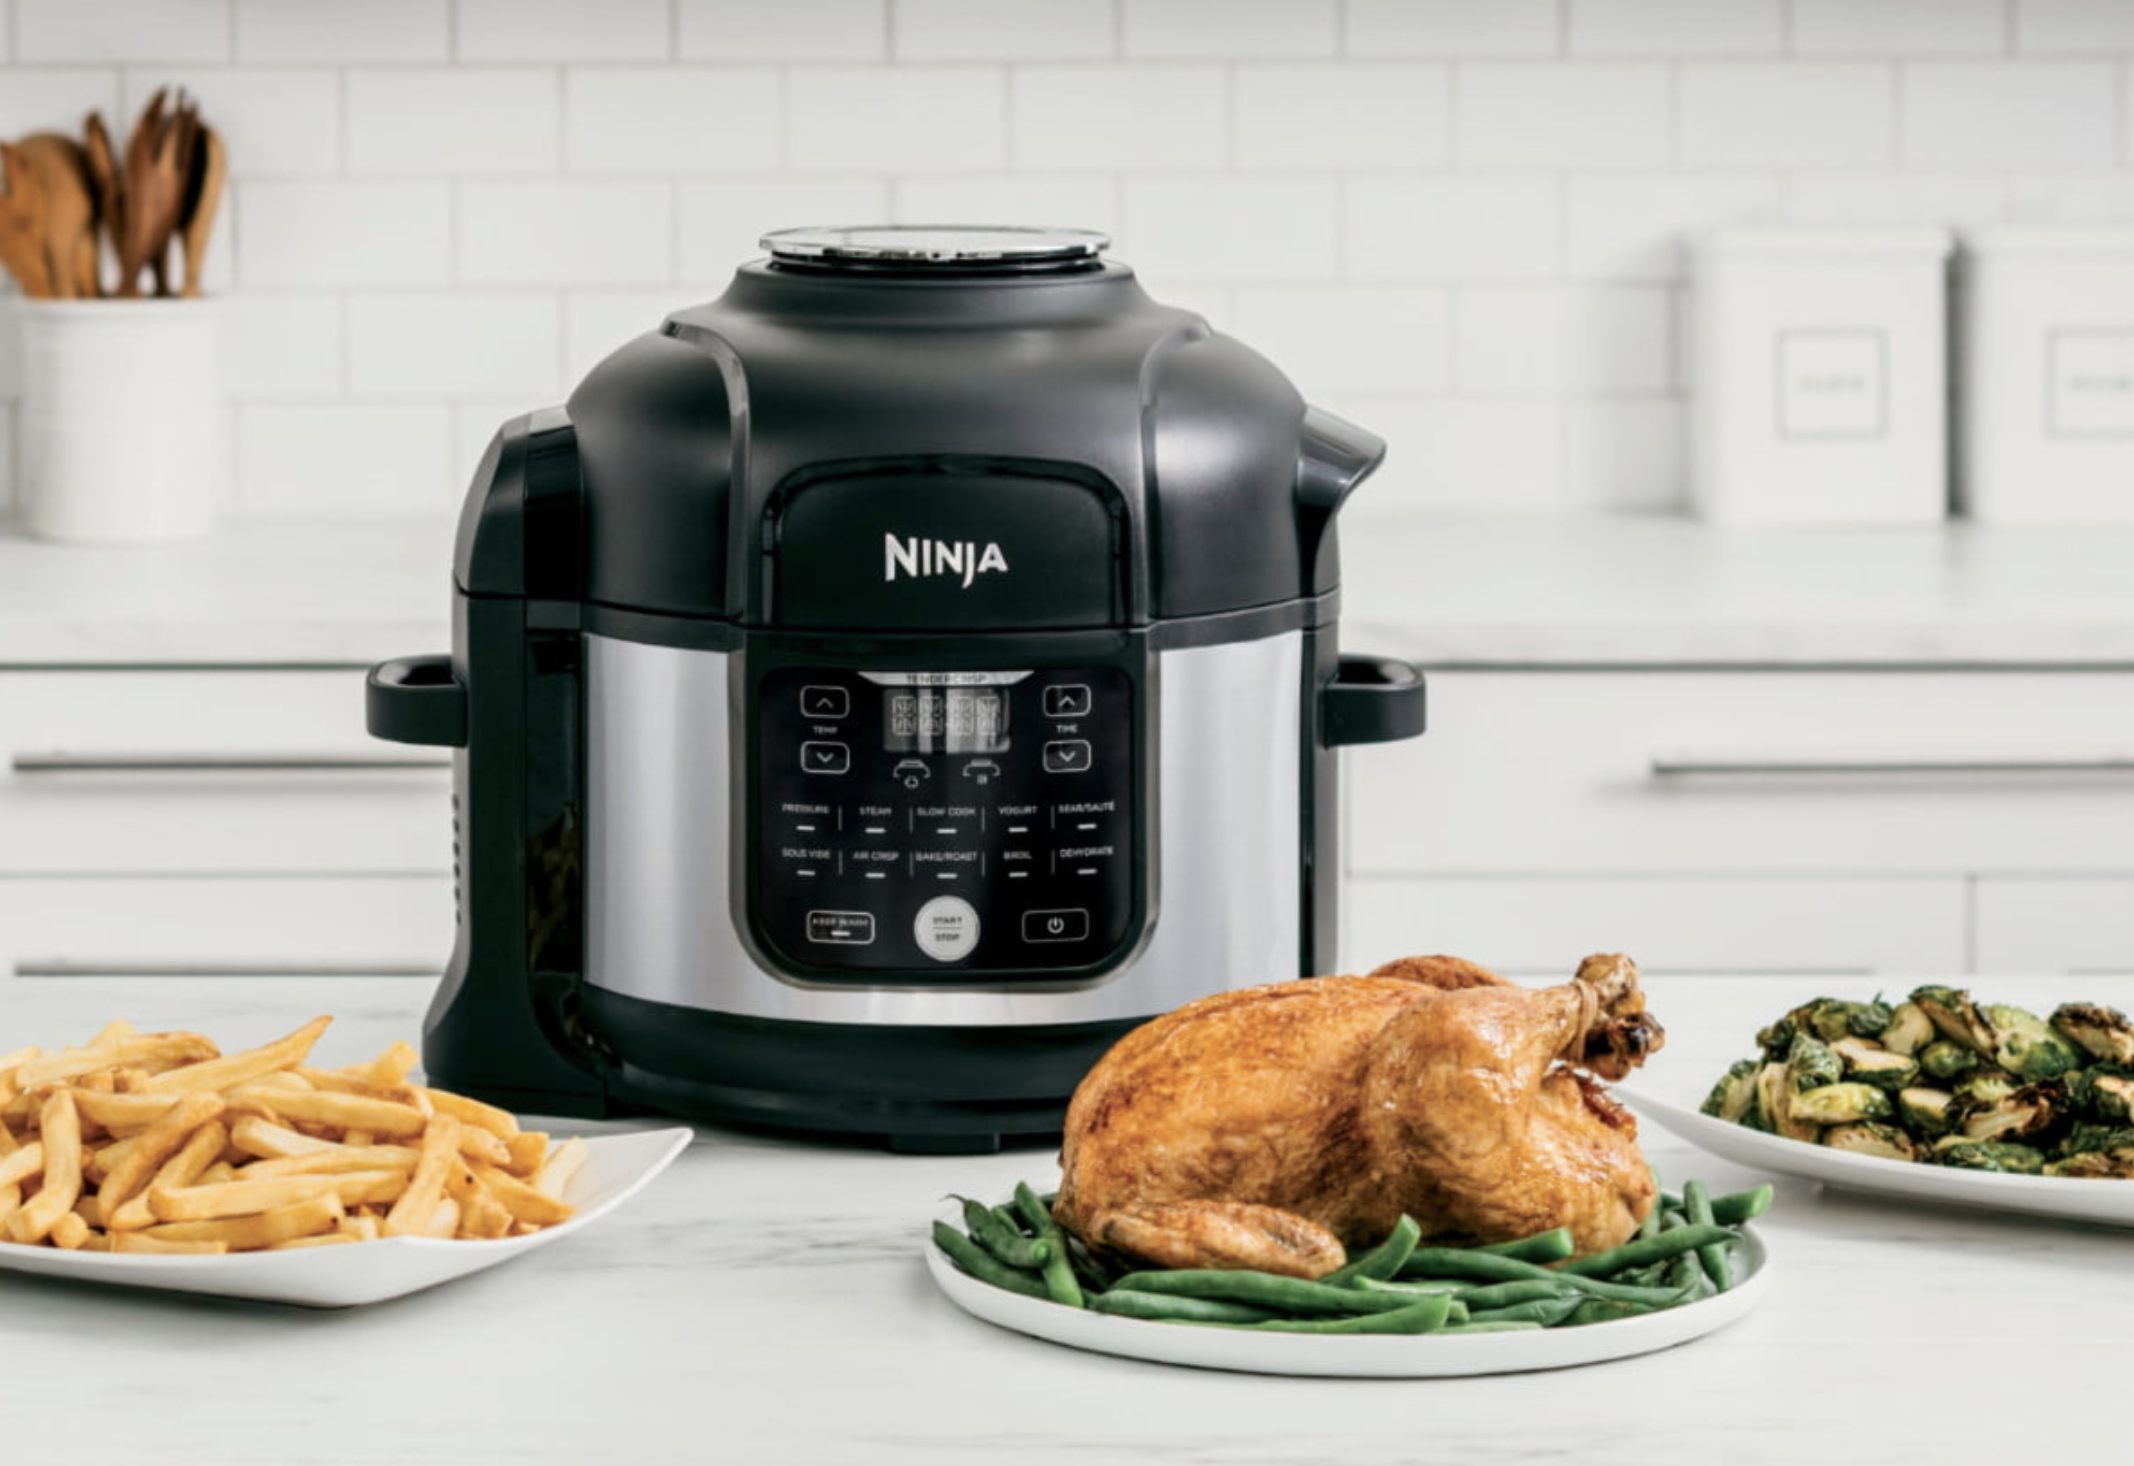 Hurry! This Ninja Foodi air fryer is at its lowest price ever at